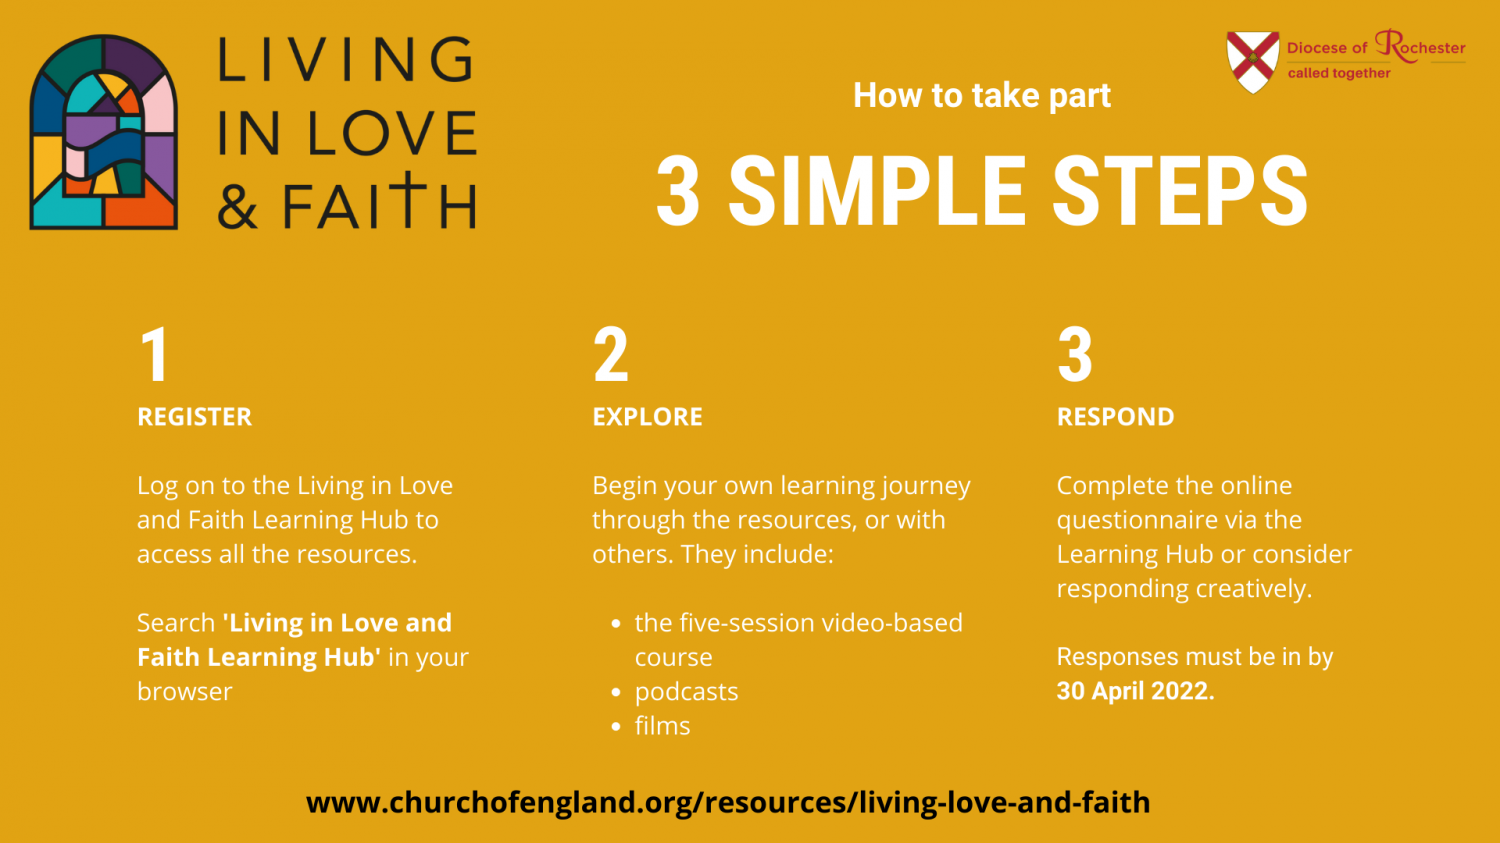 Register, explore, respond. 3 steps to take part in Living in Love and Faith